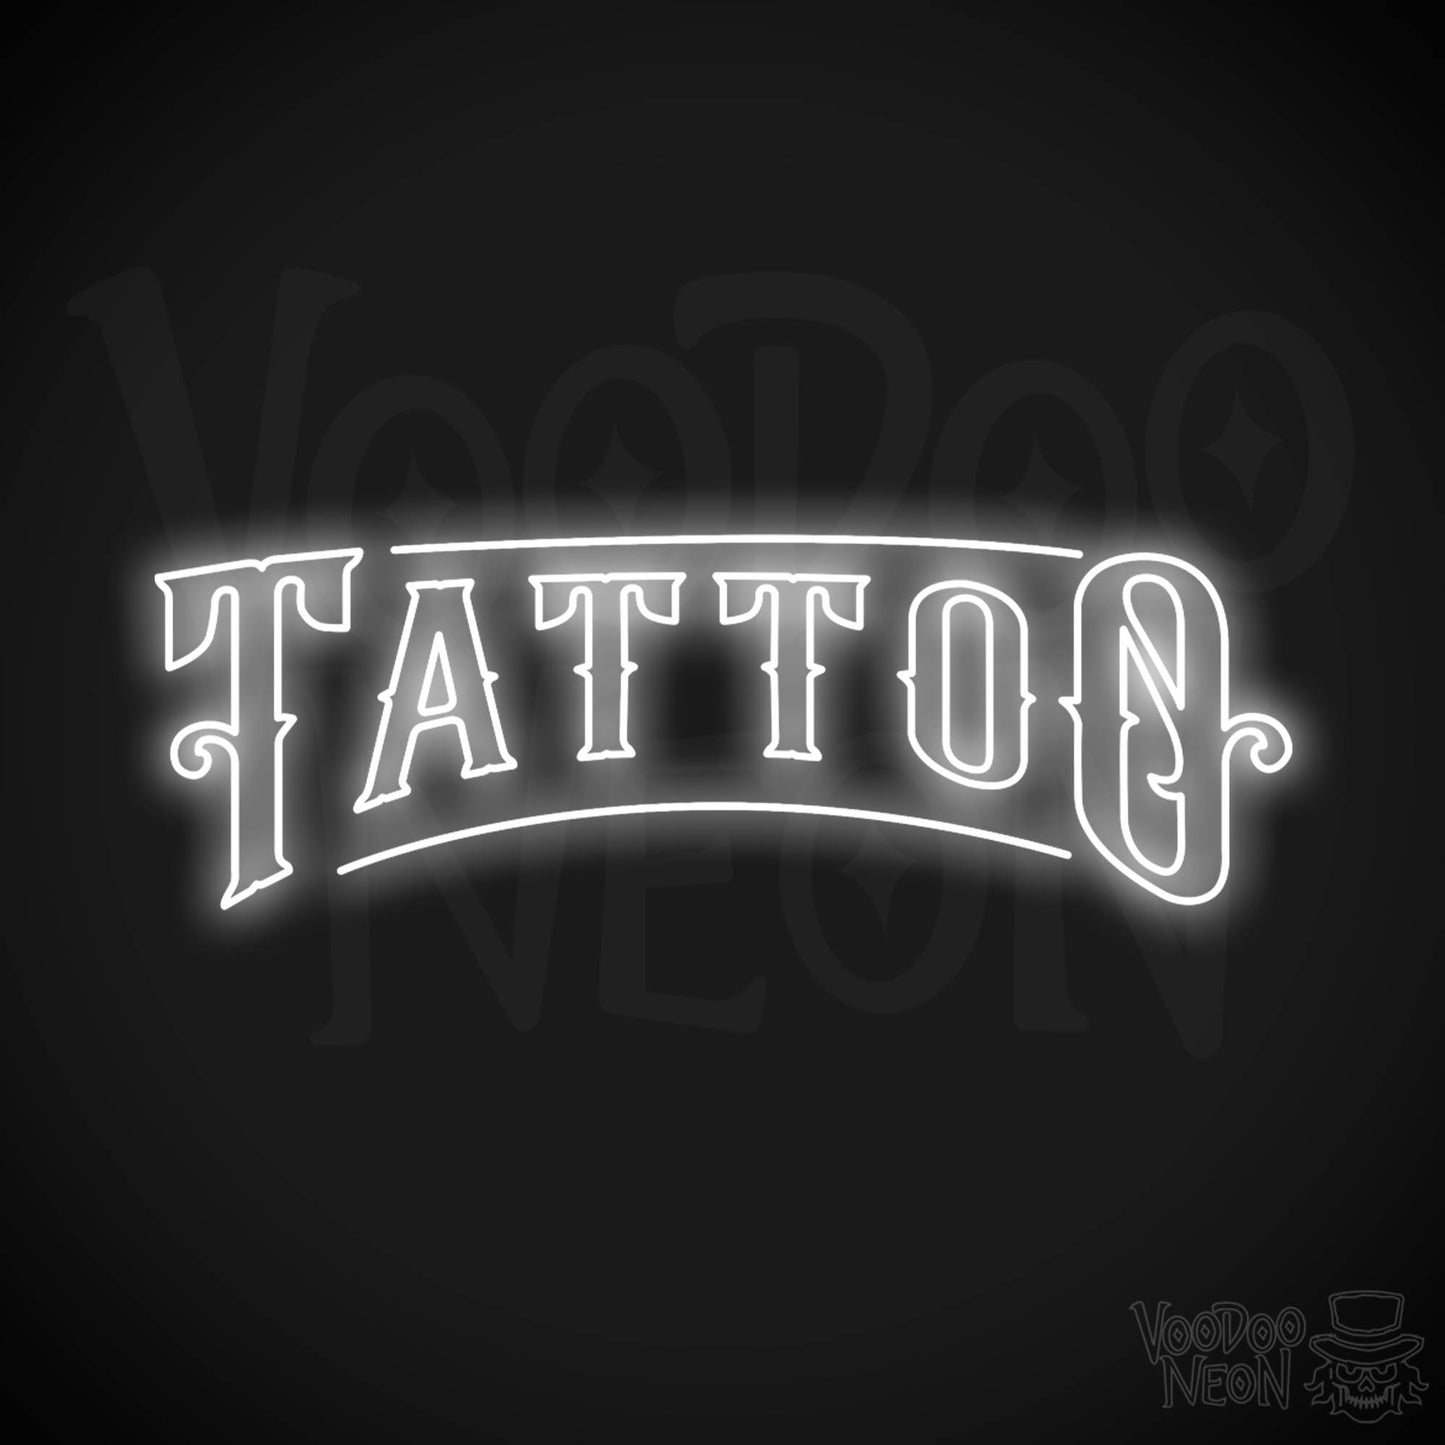 Tattoo Parlor LED Neon - White